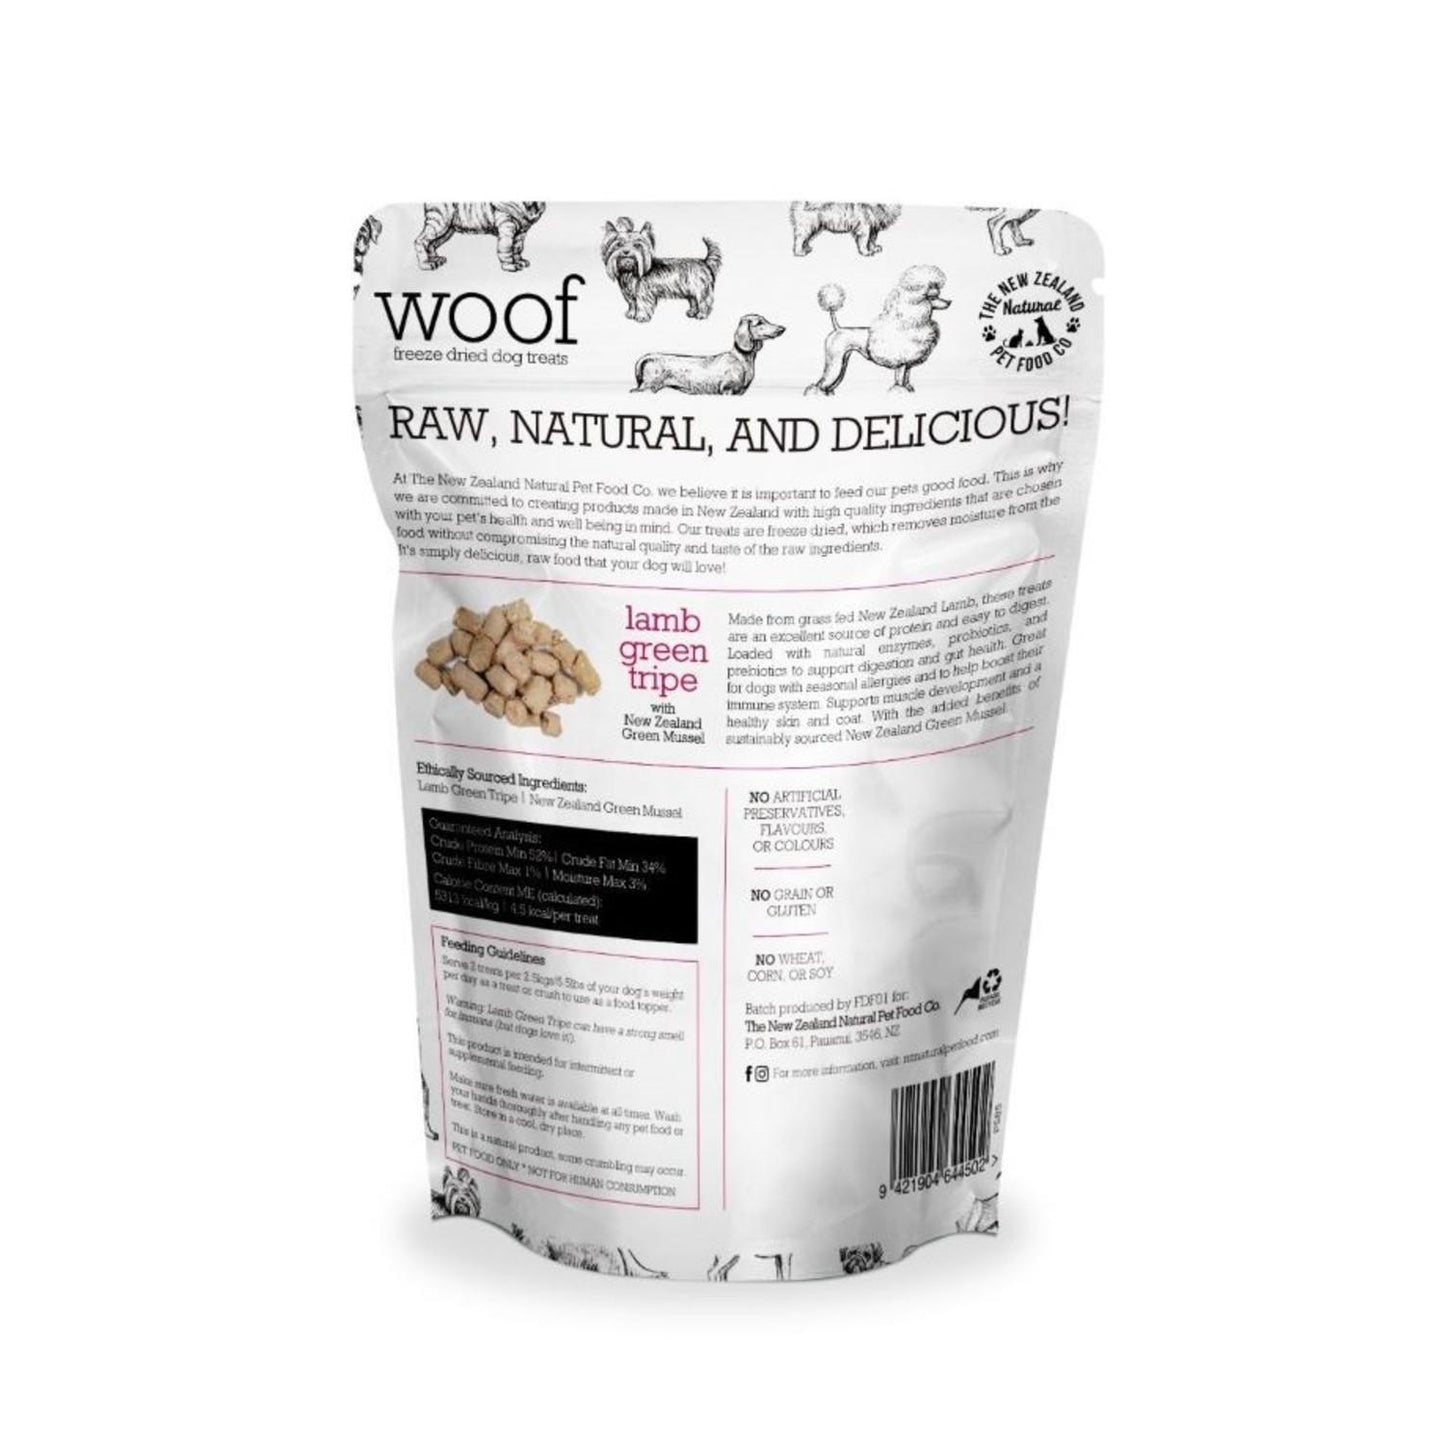 WOOF Lamb Green Tripe with Green Lipped Mussel Freeze-Dried Dog Treat